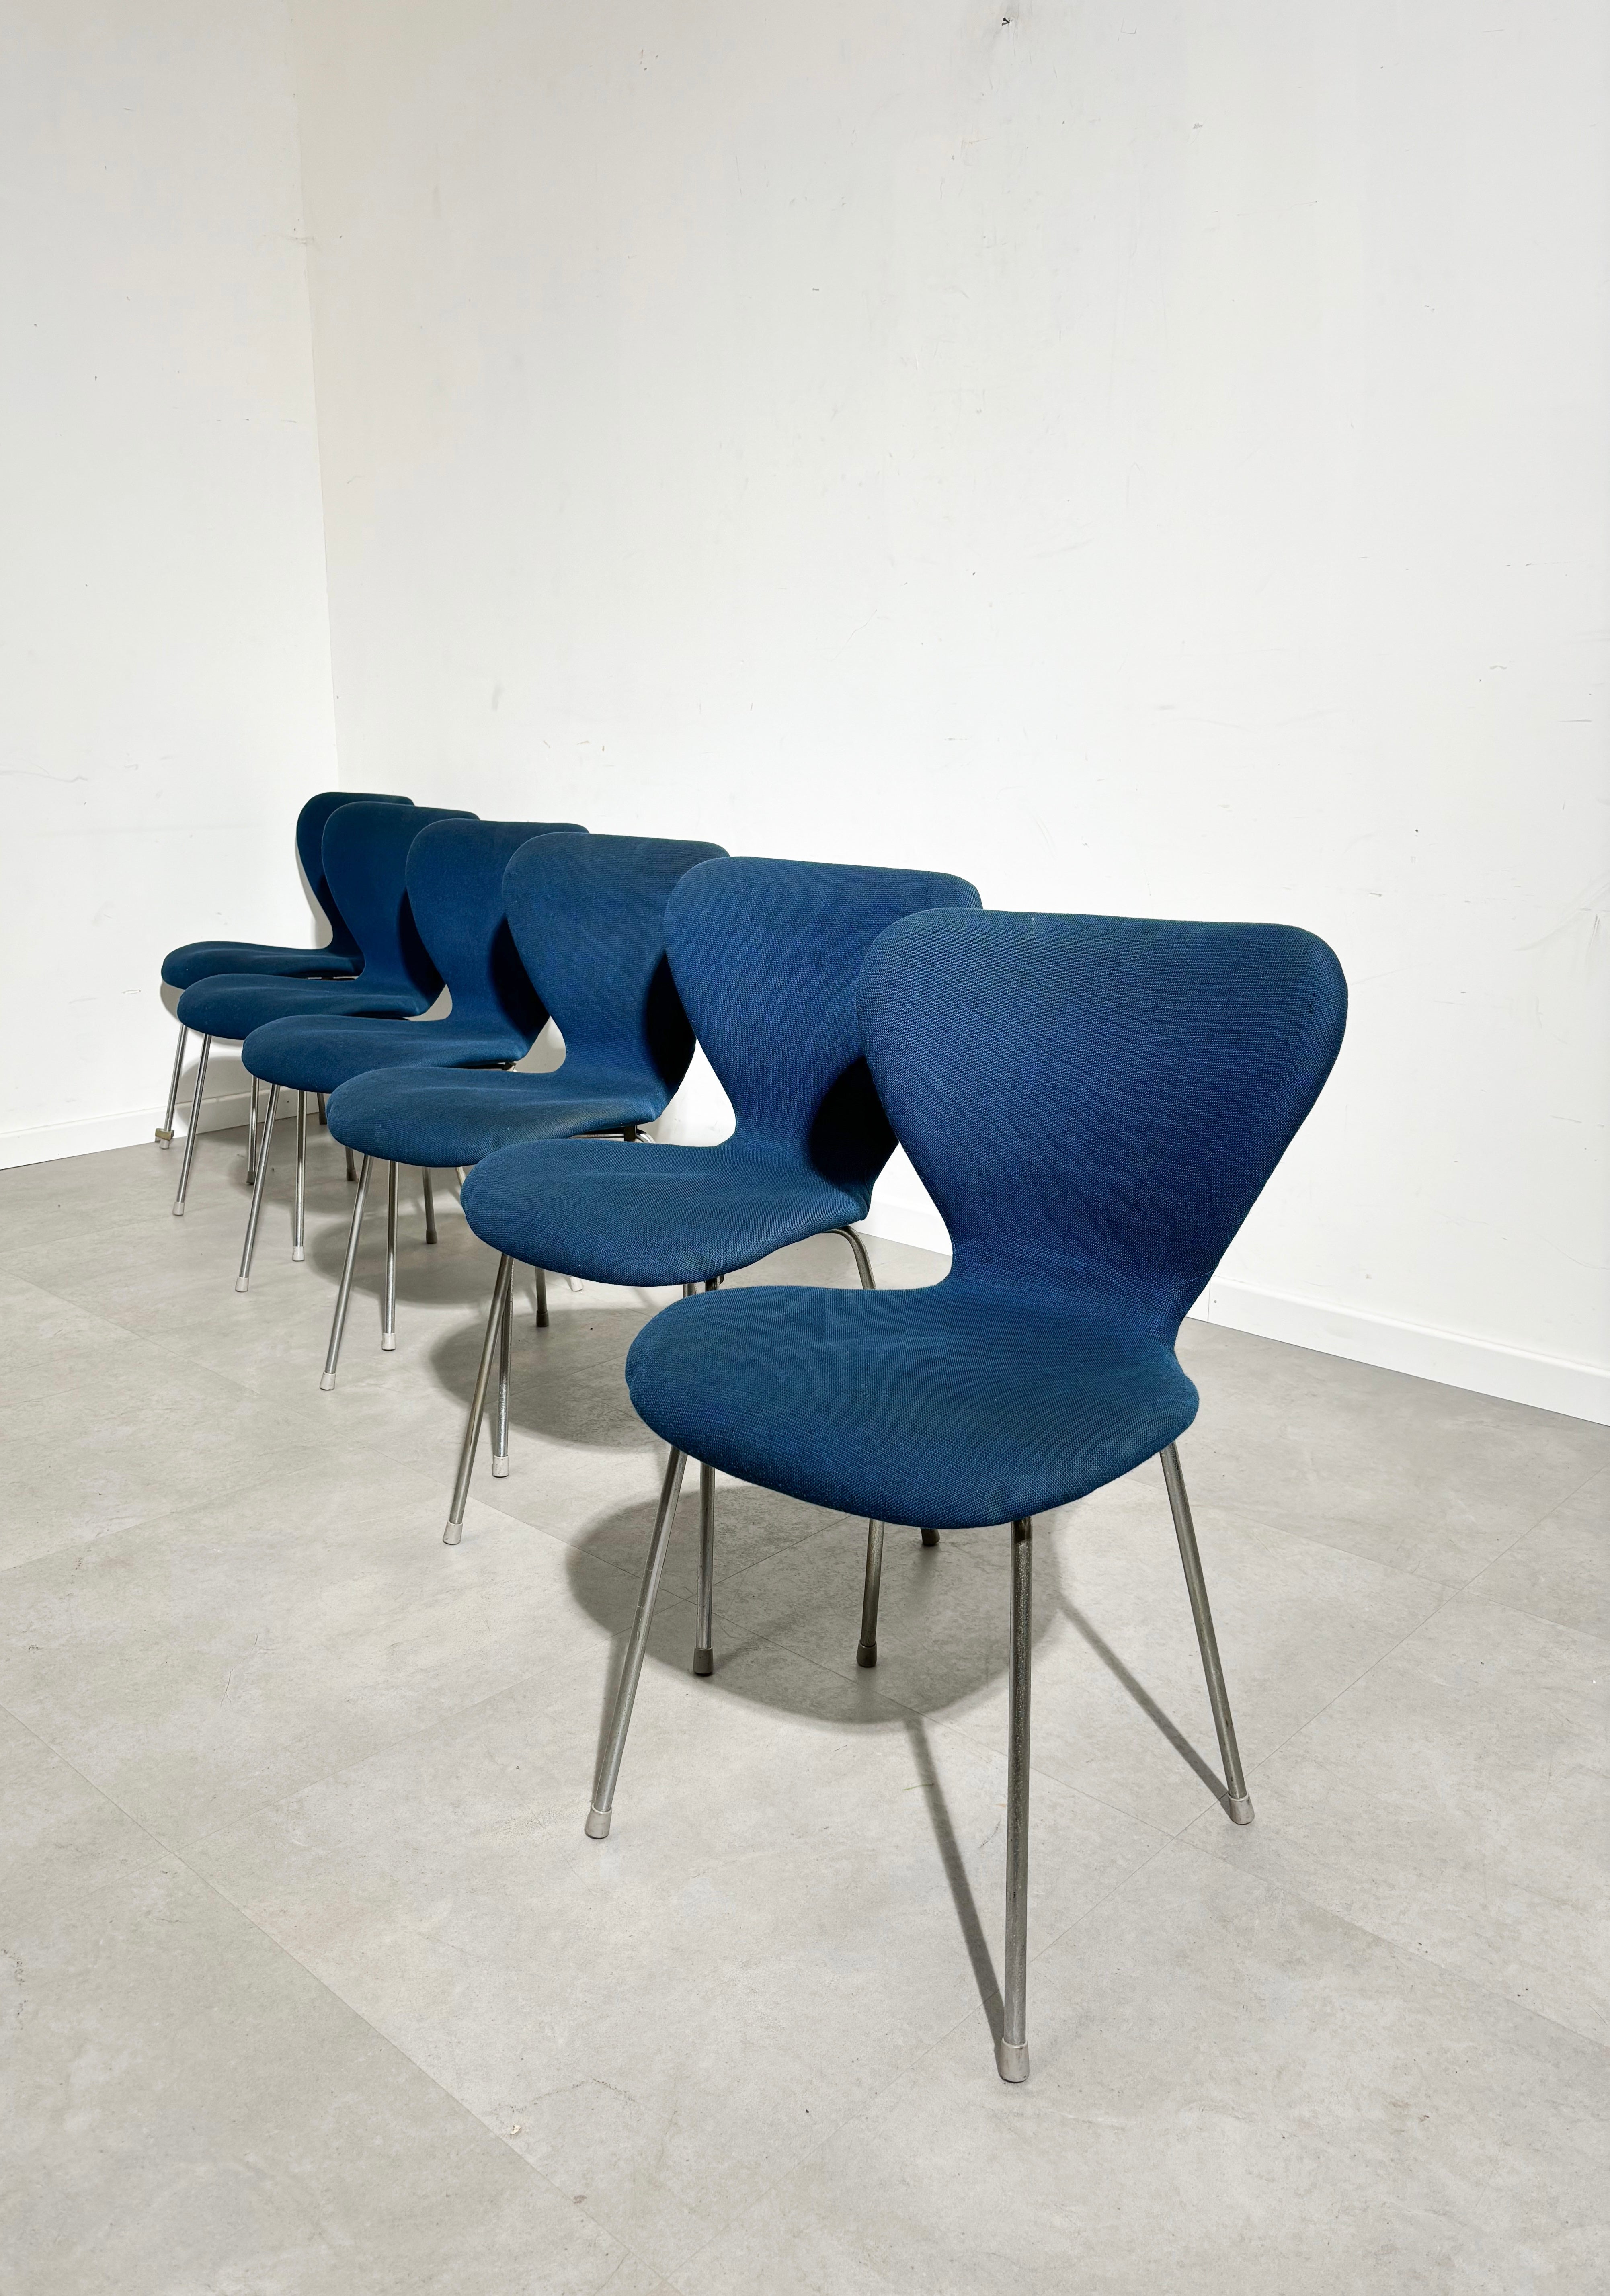 Set of six dining chairs by Egon Eiermann for Wilde & Spieth